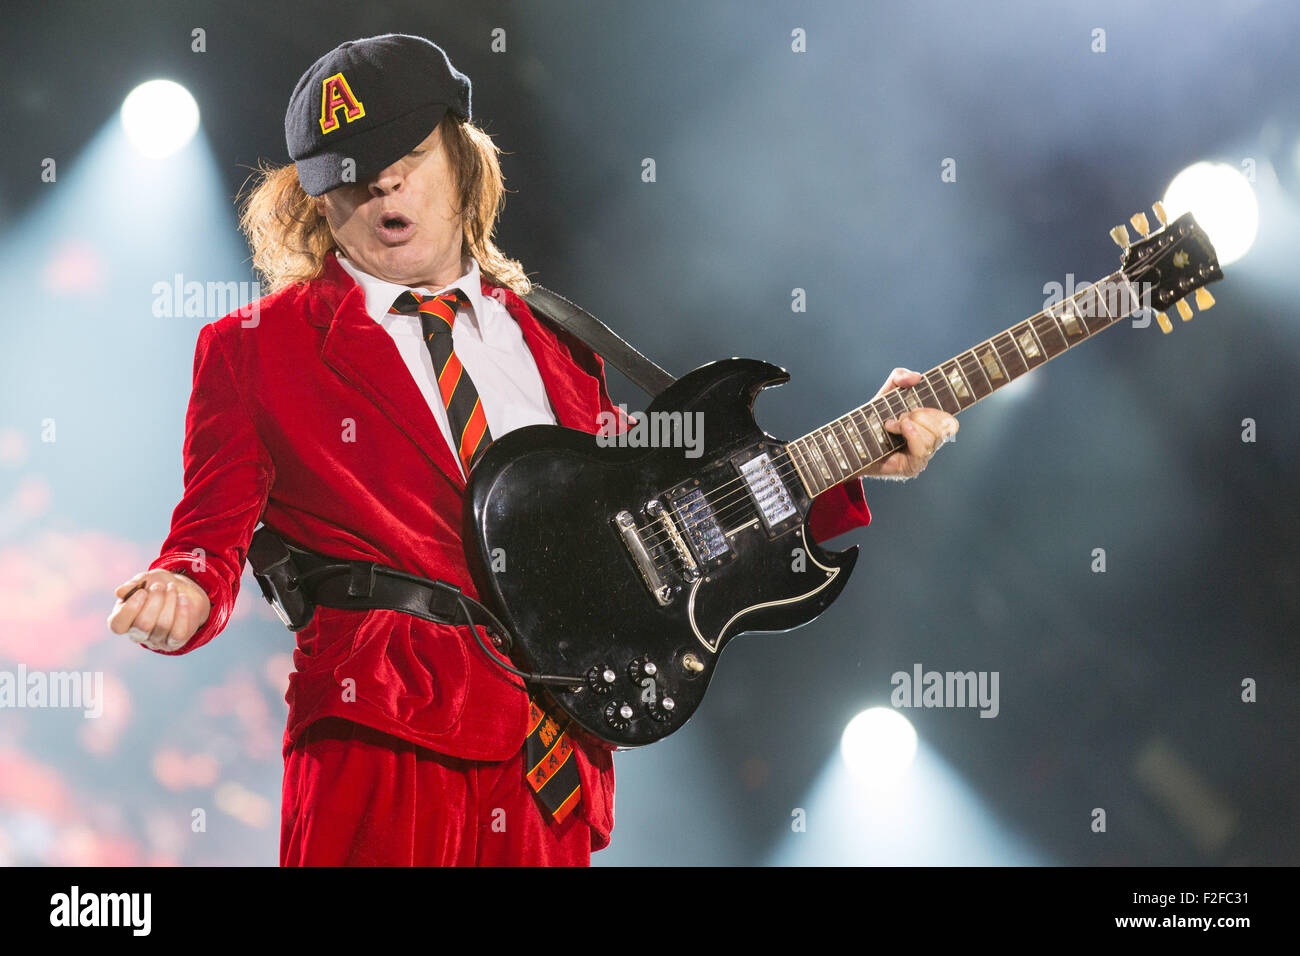 Chicago, Illinois, USA. 15th Sep, 2015. Guitarist ANGUS YOUNG of AC/DC performs live during the Rock or Bust tour at Wrigley Field in Chicago, Illinois © Daniel DeSlover/ZUMA Wire/Alamy Live News Stock Photo